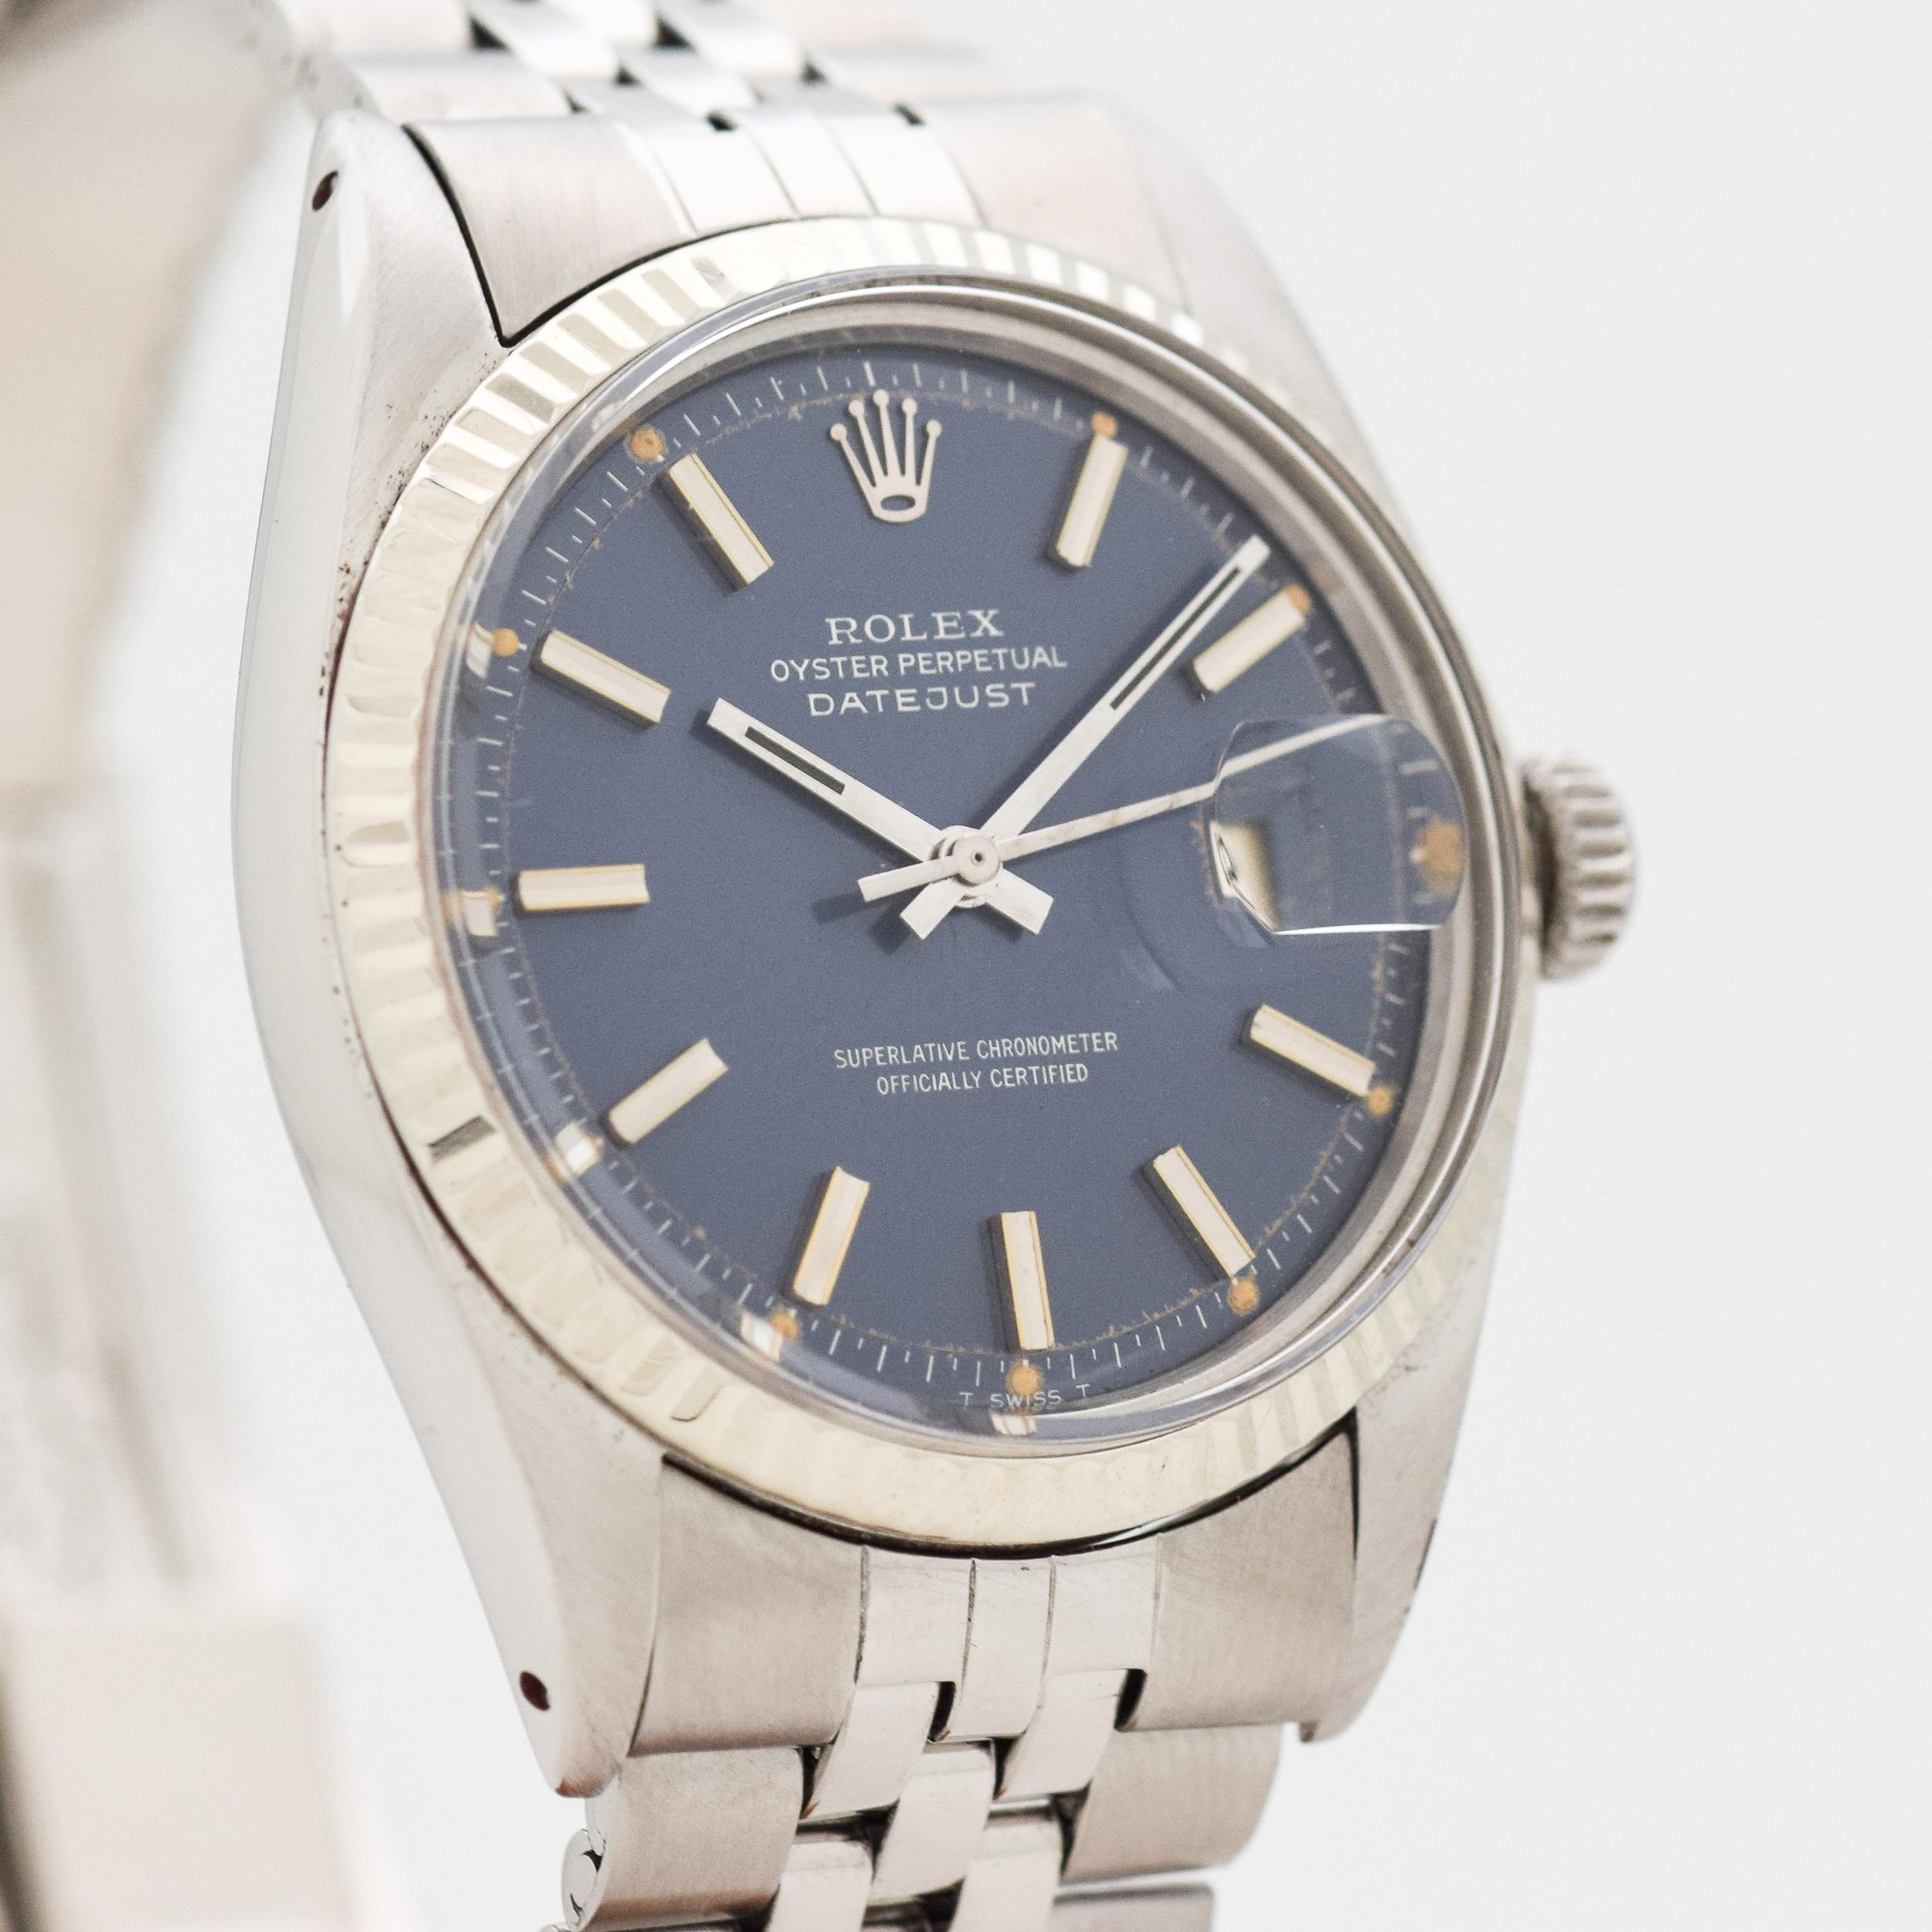 1971 Vintage Rolex Datejust Ref. 1601 14k White Gold Fluted Bezel with Stainless Steel Case watch with Rare Original Blue Dial with Applied Steel Stick/Bar/Baton Markers with Original Rolex Stainless Steel Jubilee Bracelet. 36mm x 43mm lug to lug